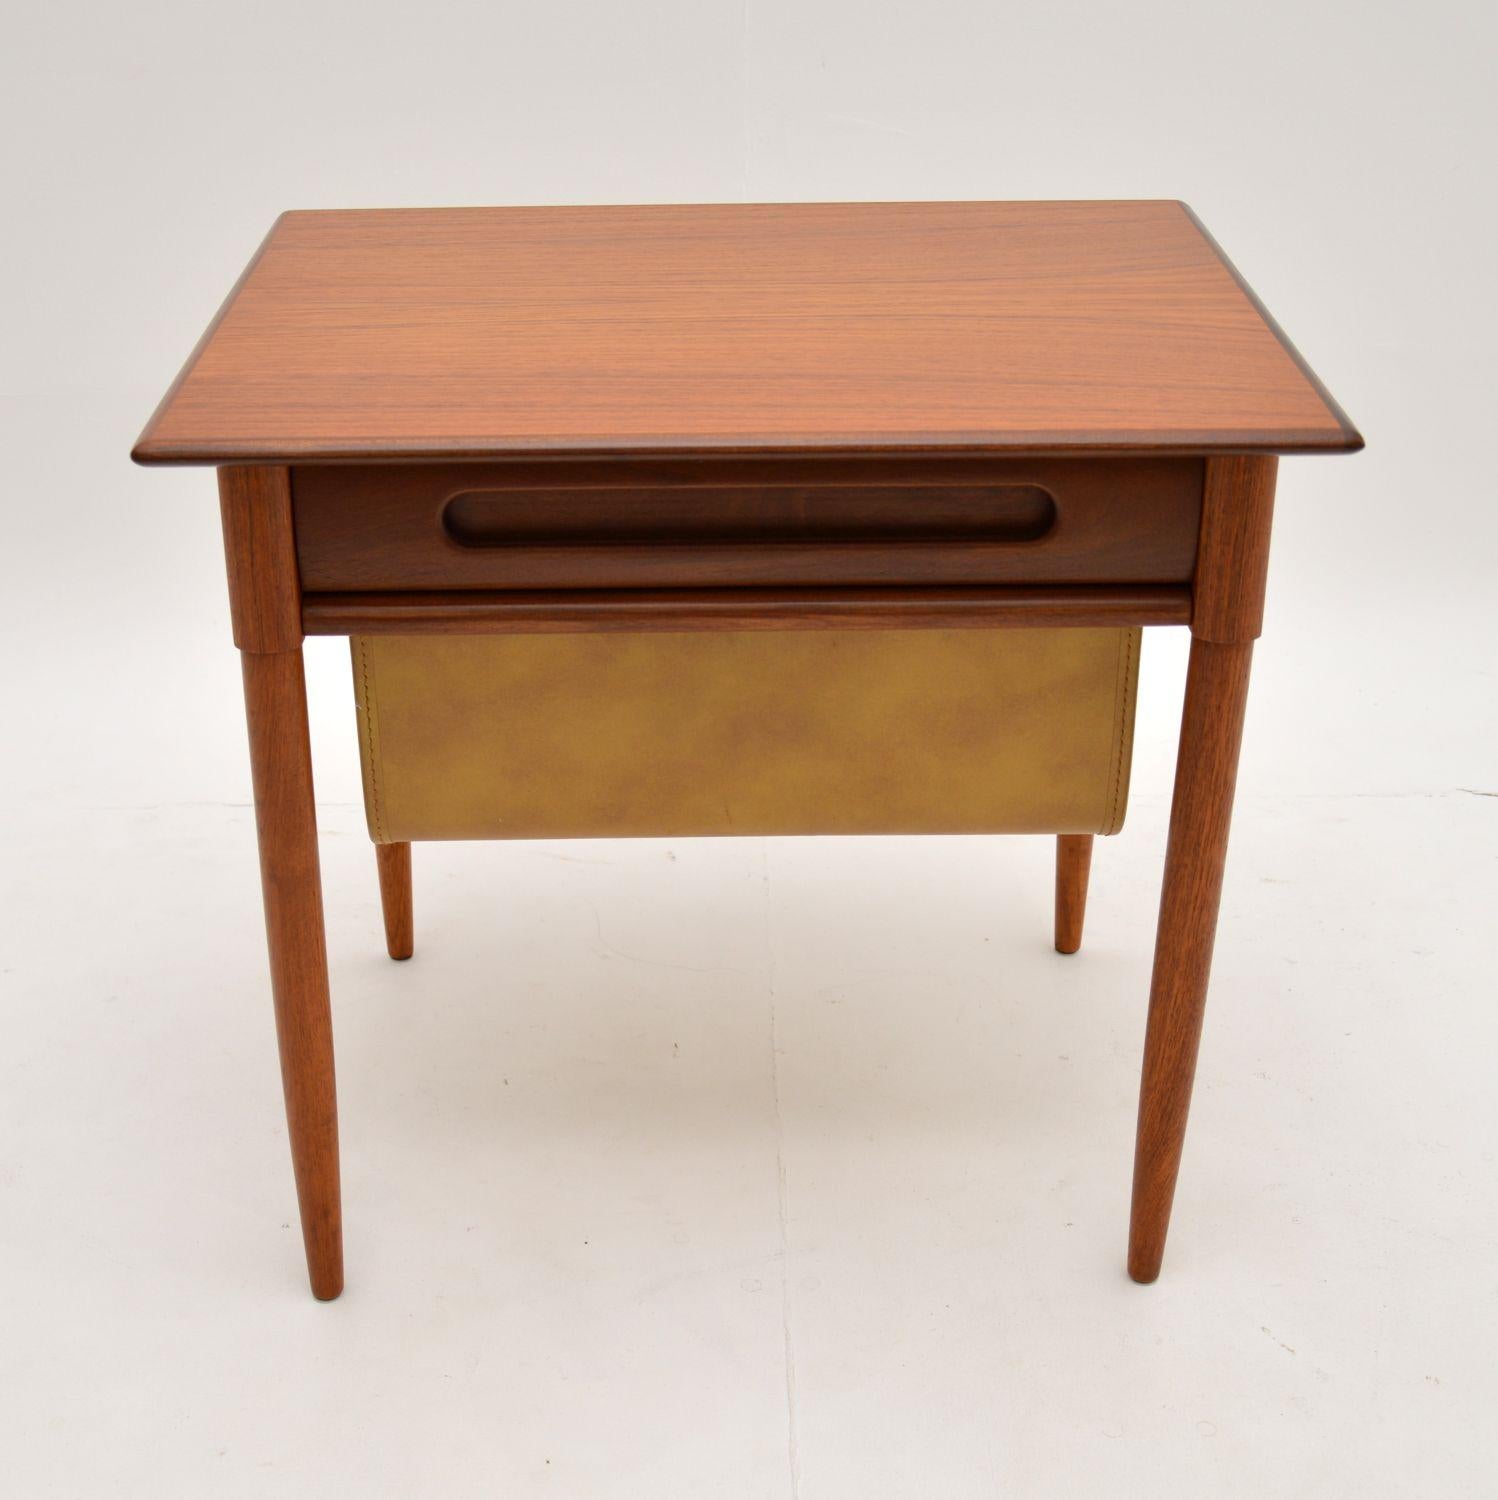 A stunning vintage teak work box side table, made in Norway in the 1960’s. This was designed by Karl Edvard Korseth for Rybo.

It is a very useful piece, originally designed as a sewing work box. The upper drawer contains fitted plastic